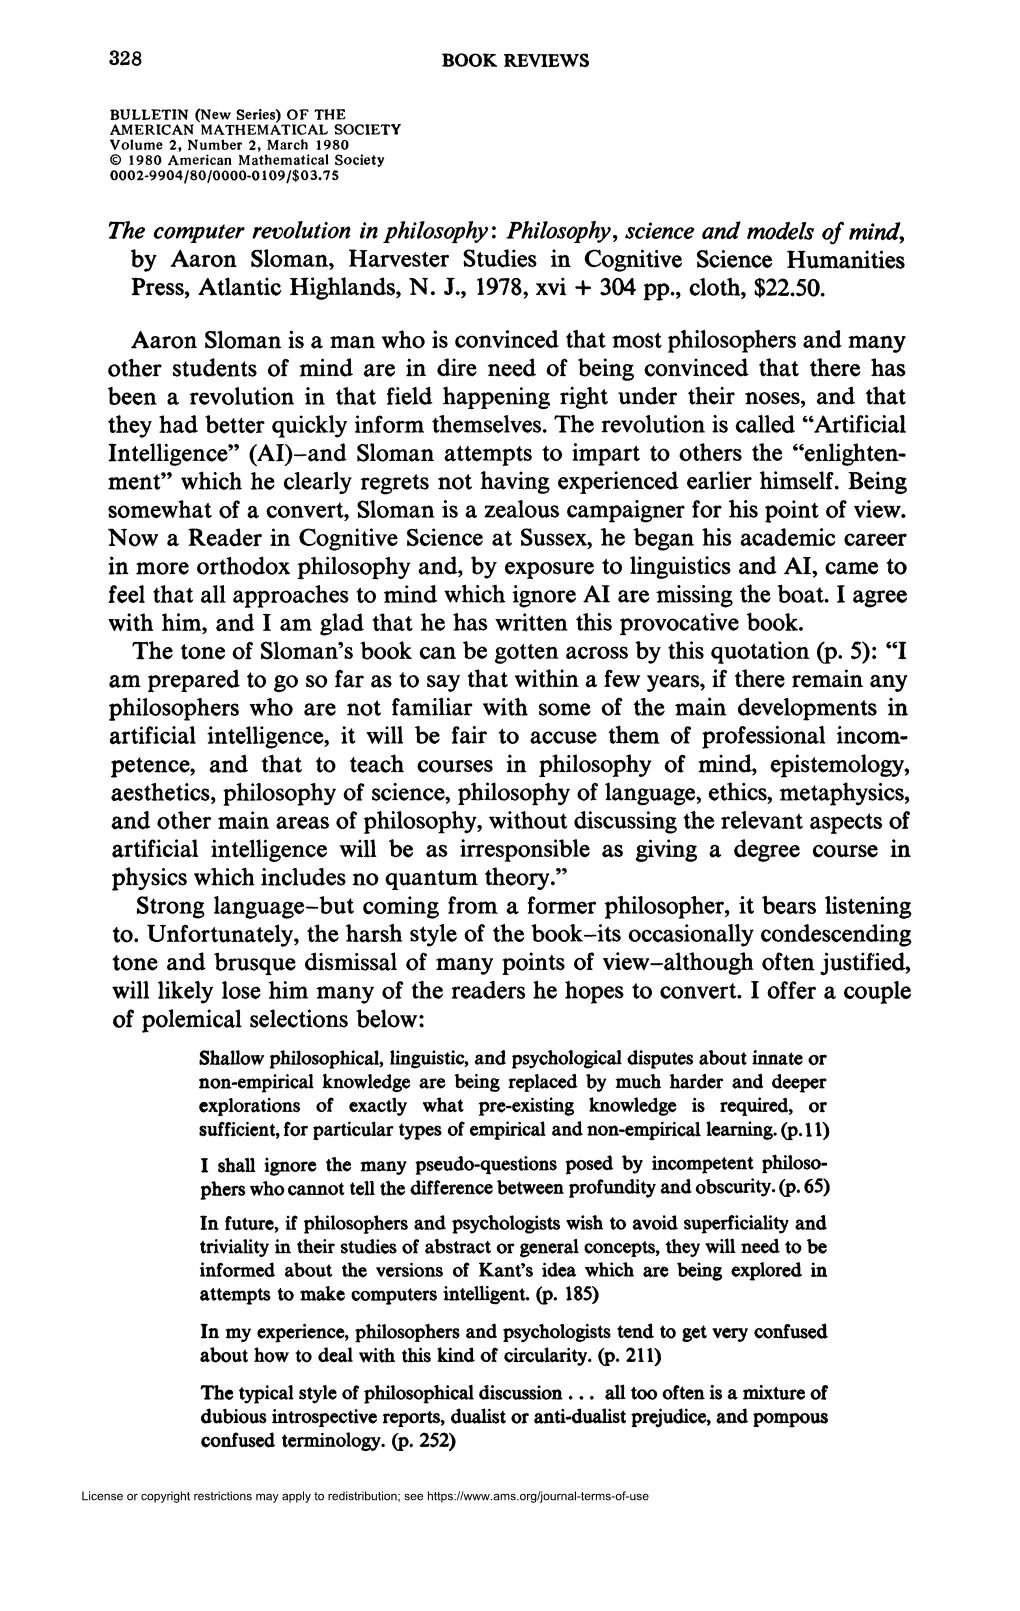 Philosophy, Science and Models of Mind, by Aaron Sloman, Harvester Studies in Cognitive Science Humanities Press, Atlantic Highlands, N